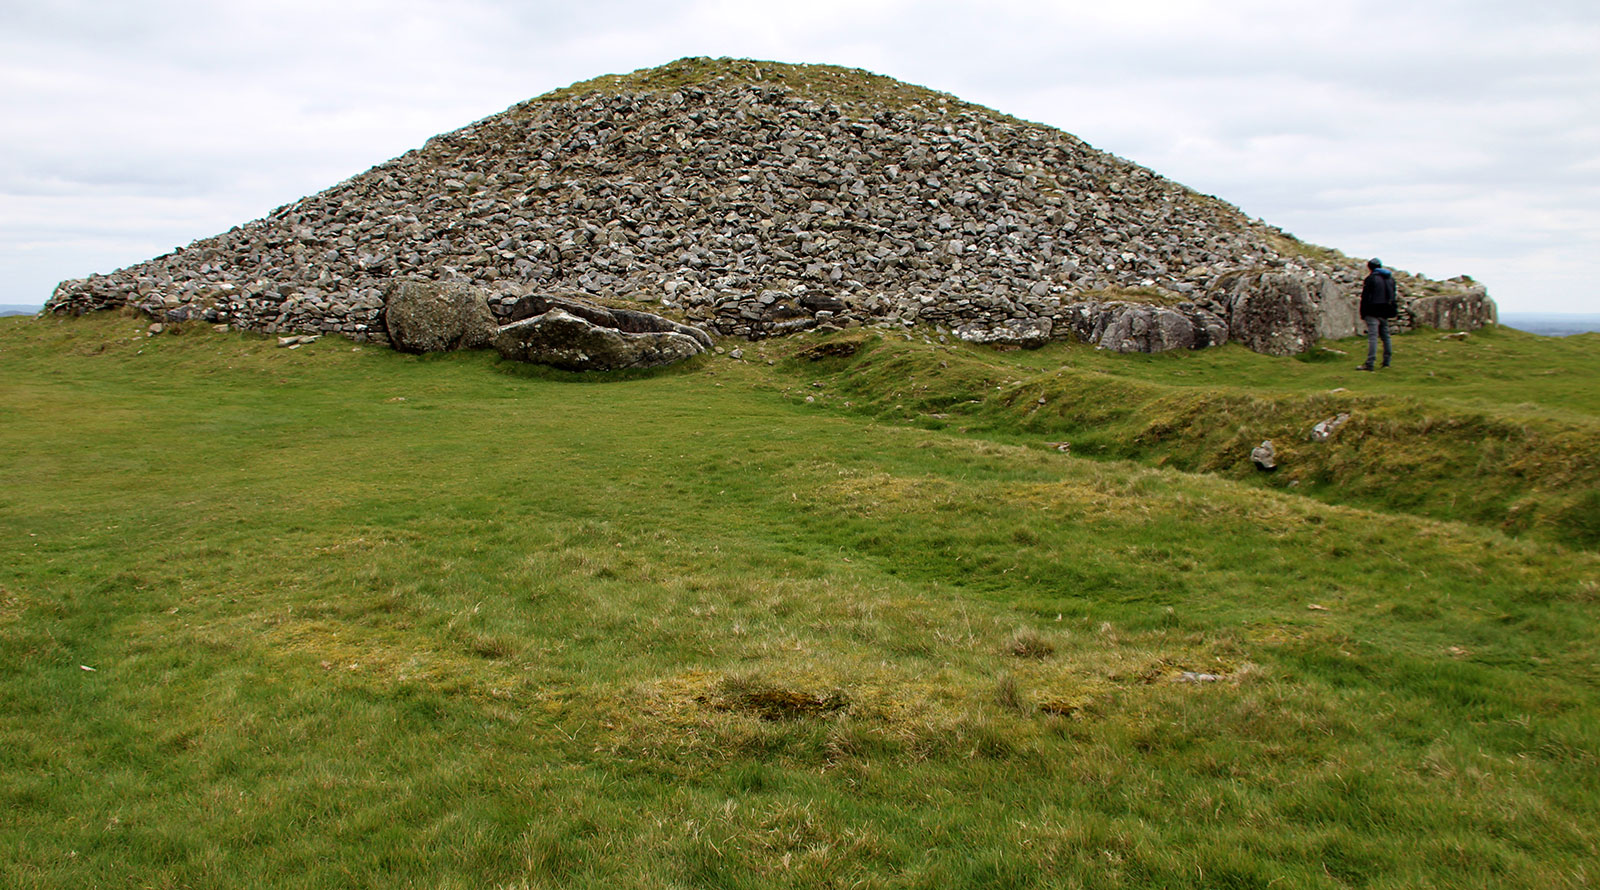 The Hag's Cairn at Sliabh na Cailleach or Loughcrew in County Meath.